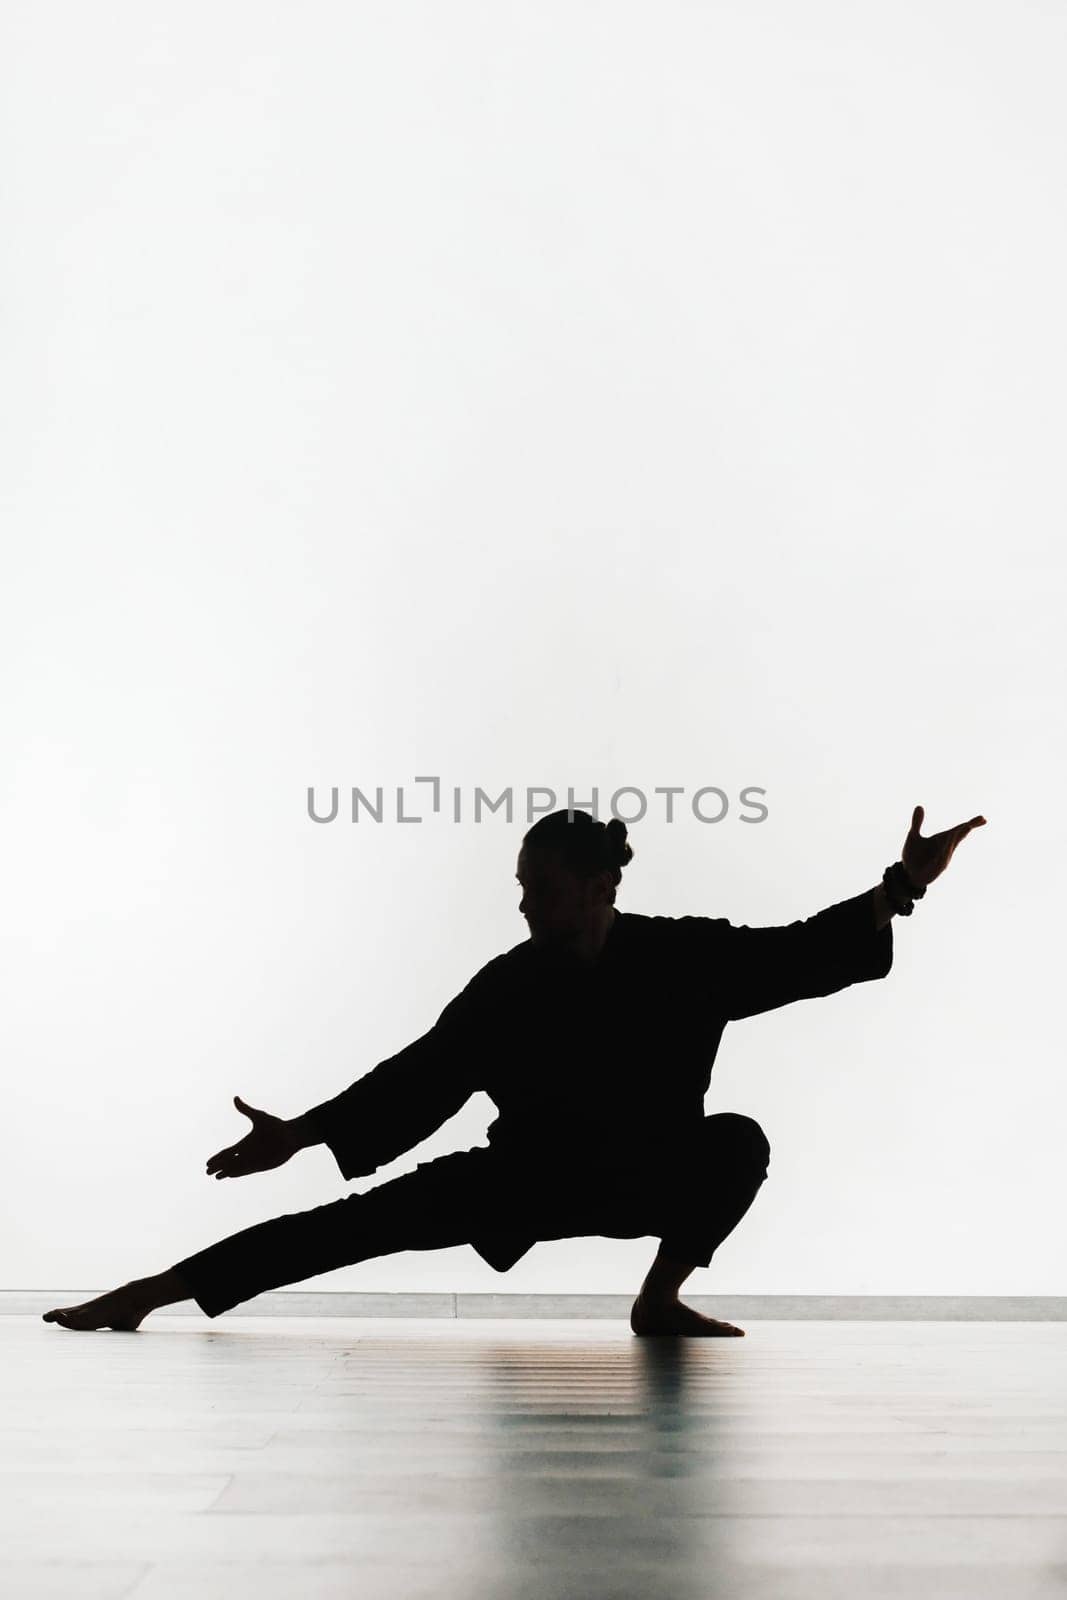 Silhouette of a person practicing qigong energy exercises on a light background.